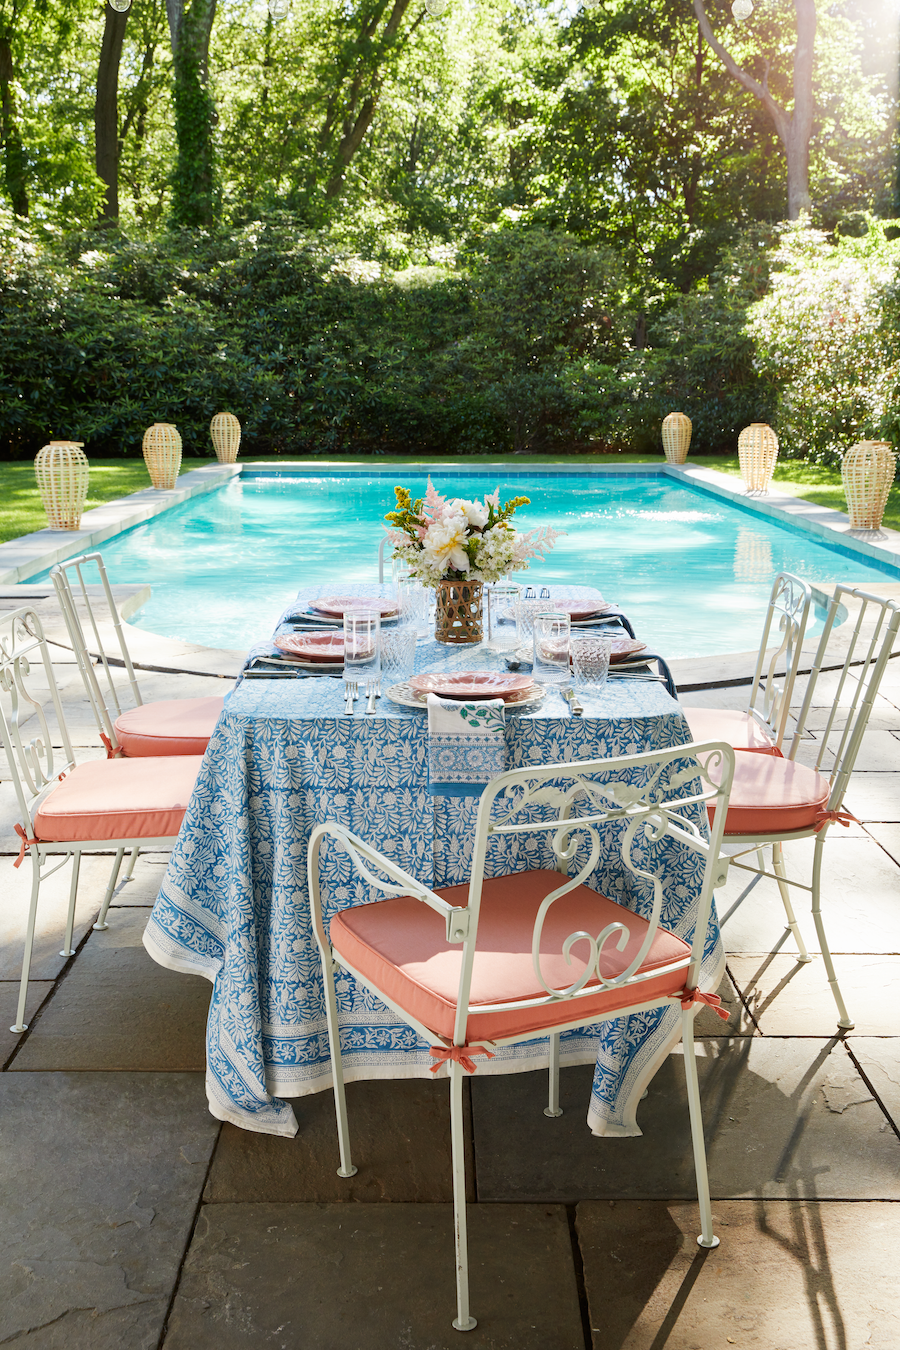 <p>This lush patio belongs to Jenna Bush Hager, who gave us on a <a href="https://www.veranda.com/home-decorators/a29416525/jenna-bush-hager-home-tour/" rel="nofollow noopener" target="_blank" data-ylk="slk:tour of her Long Island home" class="link ">tour of her Long Island home</a> in our November/December 2019 issue. Vintage iron garden furniture, layered table linens from <a href="https://go.redirectingat.com?id=74968X1596630&url=https%3A%2F%2Famandalindroth.com%2F&sref=https%3A%2F%2Fwww.veranda.com%2Foutdoor-garden%2Fg27214784%2Fpatio-ideas-backyard%2F" rel="nofollow noopener" target="_blank" data-ylk="slk:Amanda Lindroth" class="link ">Amanda Lindroth</a>, and <a href="https://www.juliska.com/" rel="nofollow noopener" target="_blank" data-ylk="slk:Juliska glassware" class="link ">Juliska glassware</a> make this an ideal setup for all your garden parties and summer luncheons. </p>